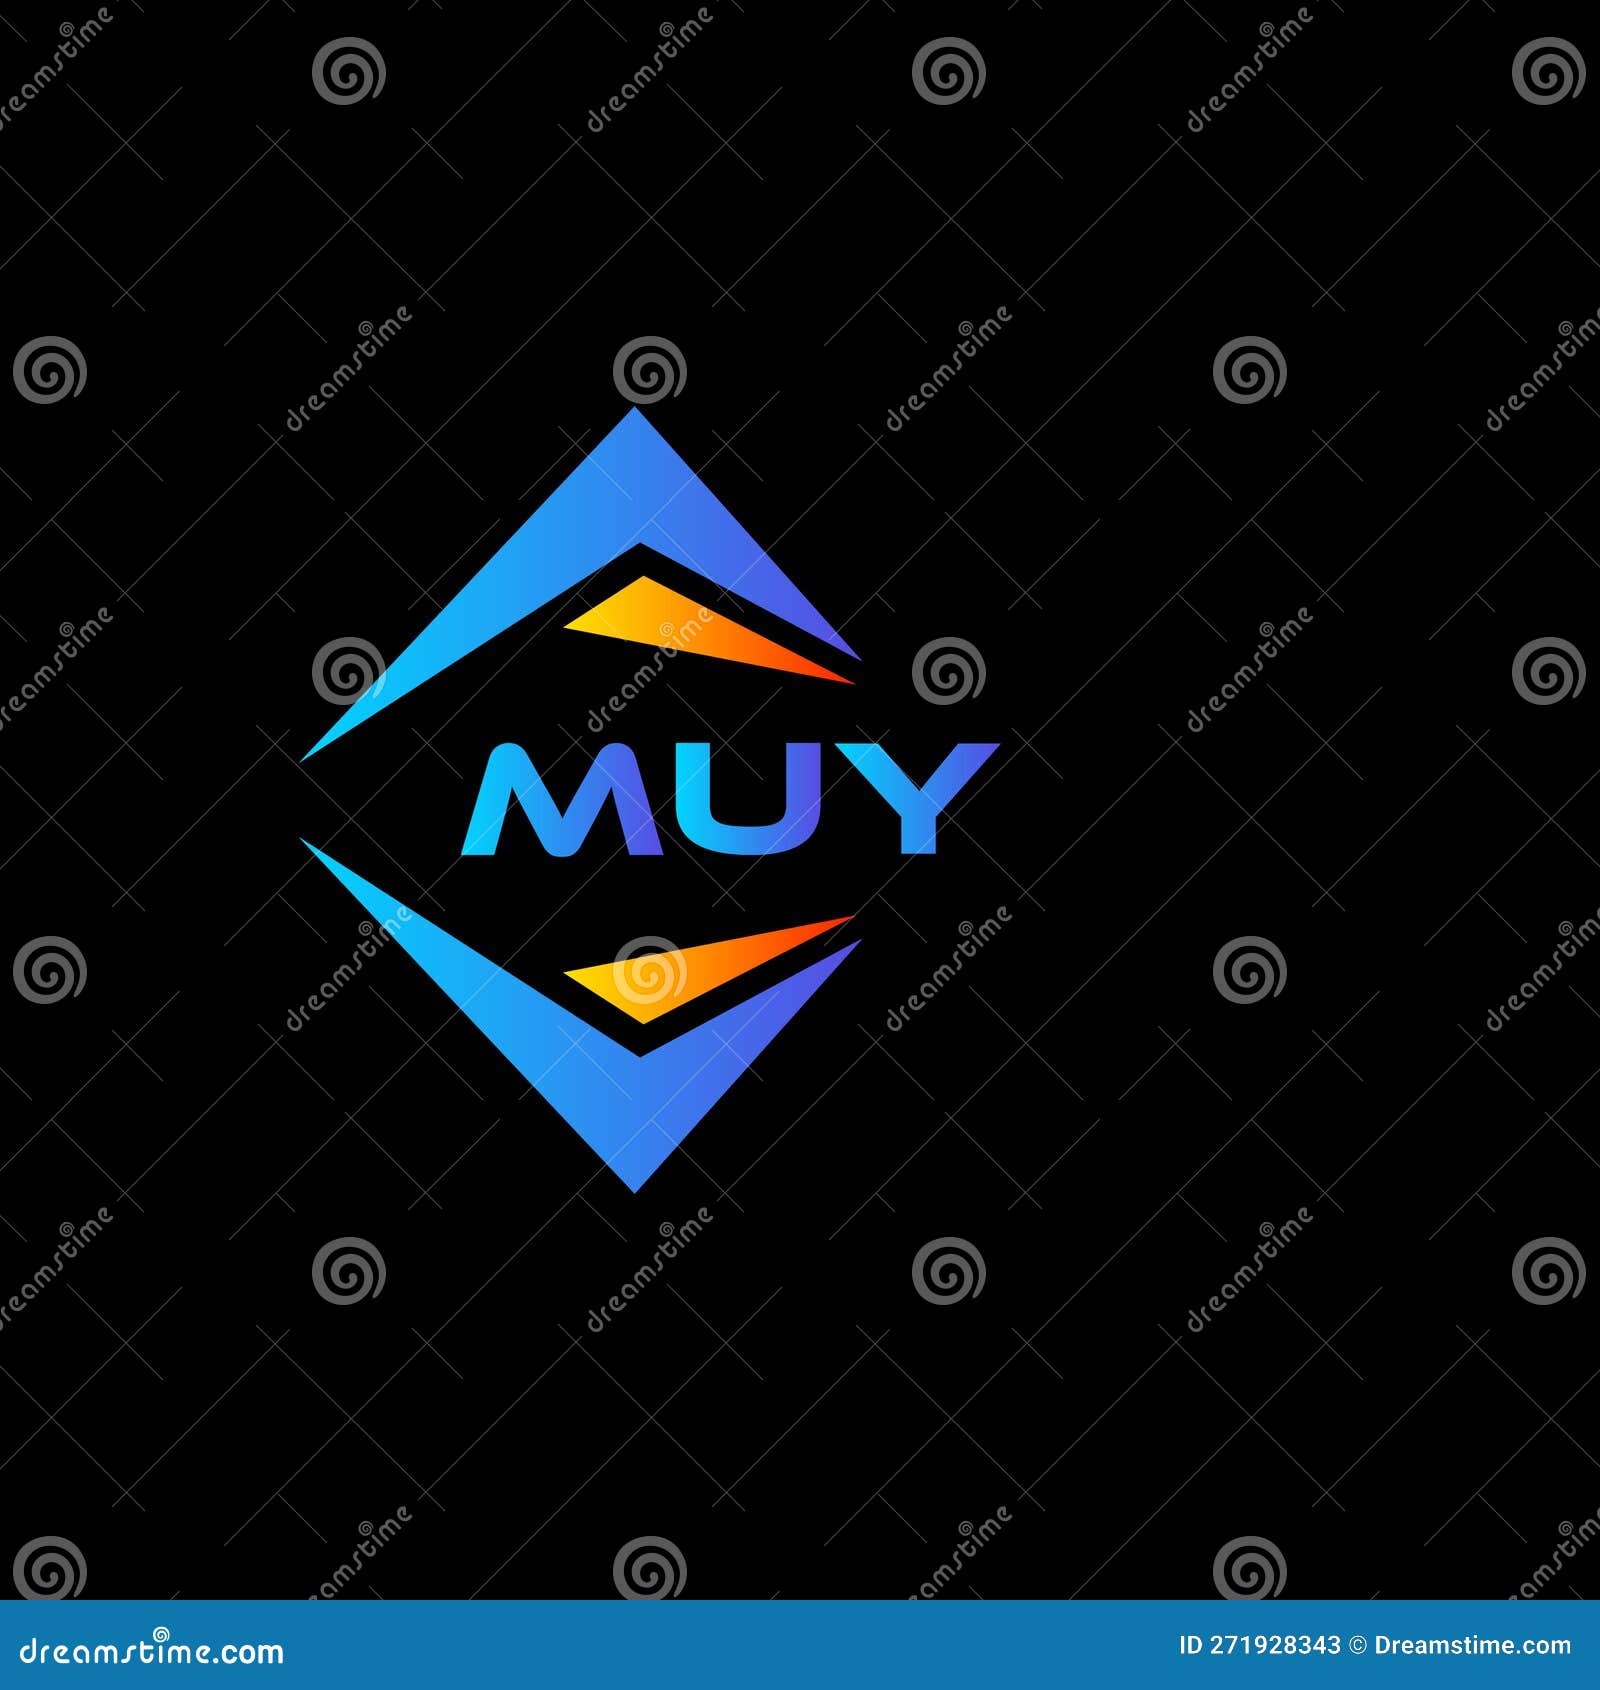 muy abstract technology logo  on black background. muy creative initials letter logo concept